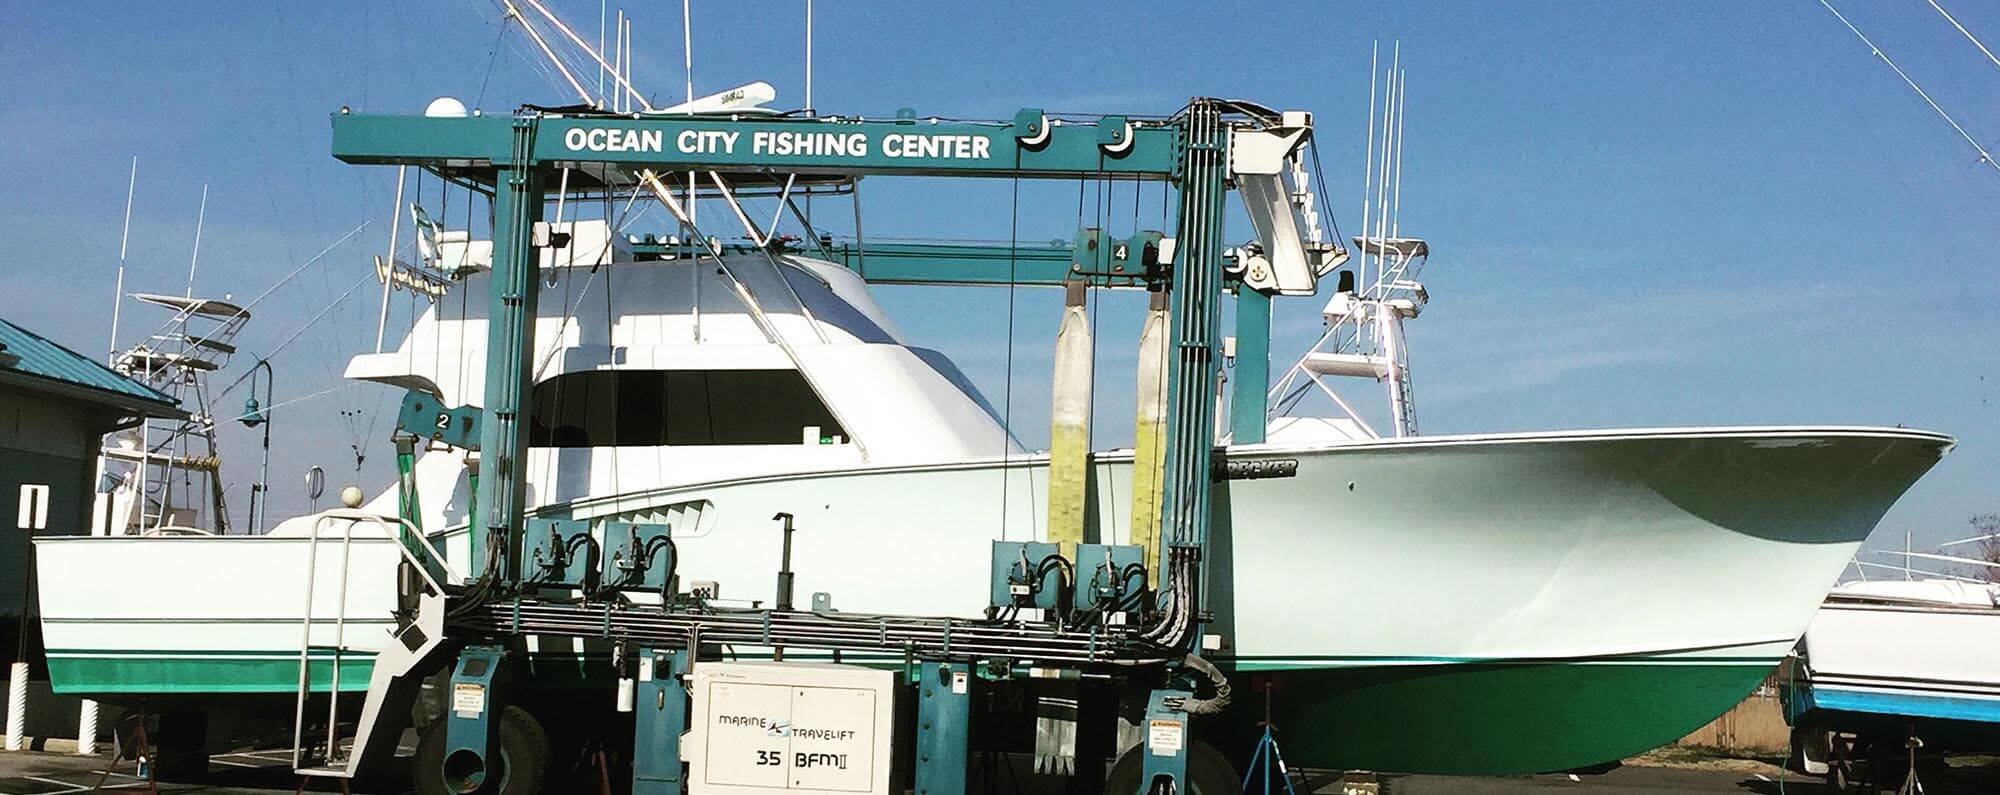 Ocean City Fishing Center travel lift carrying a boat